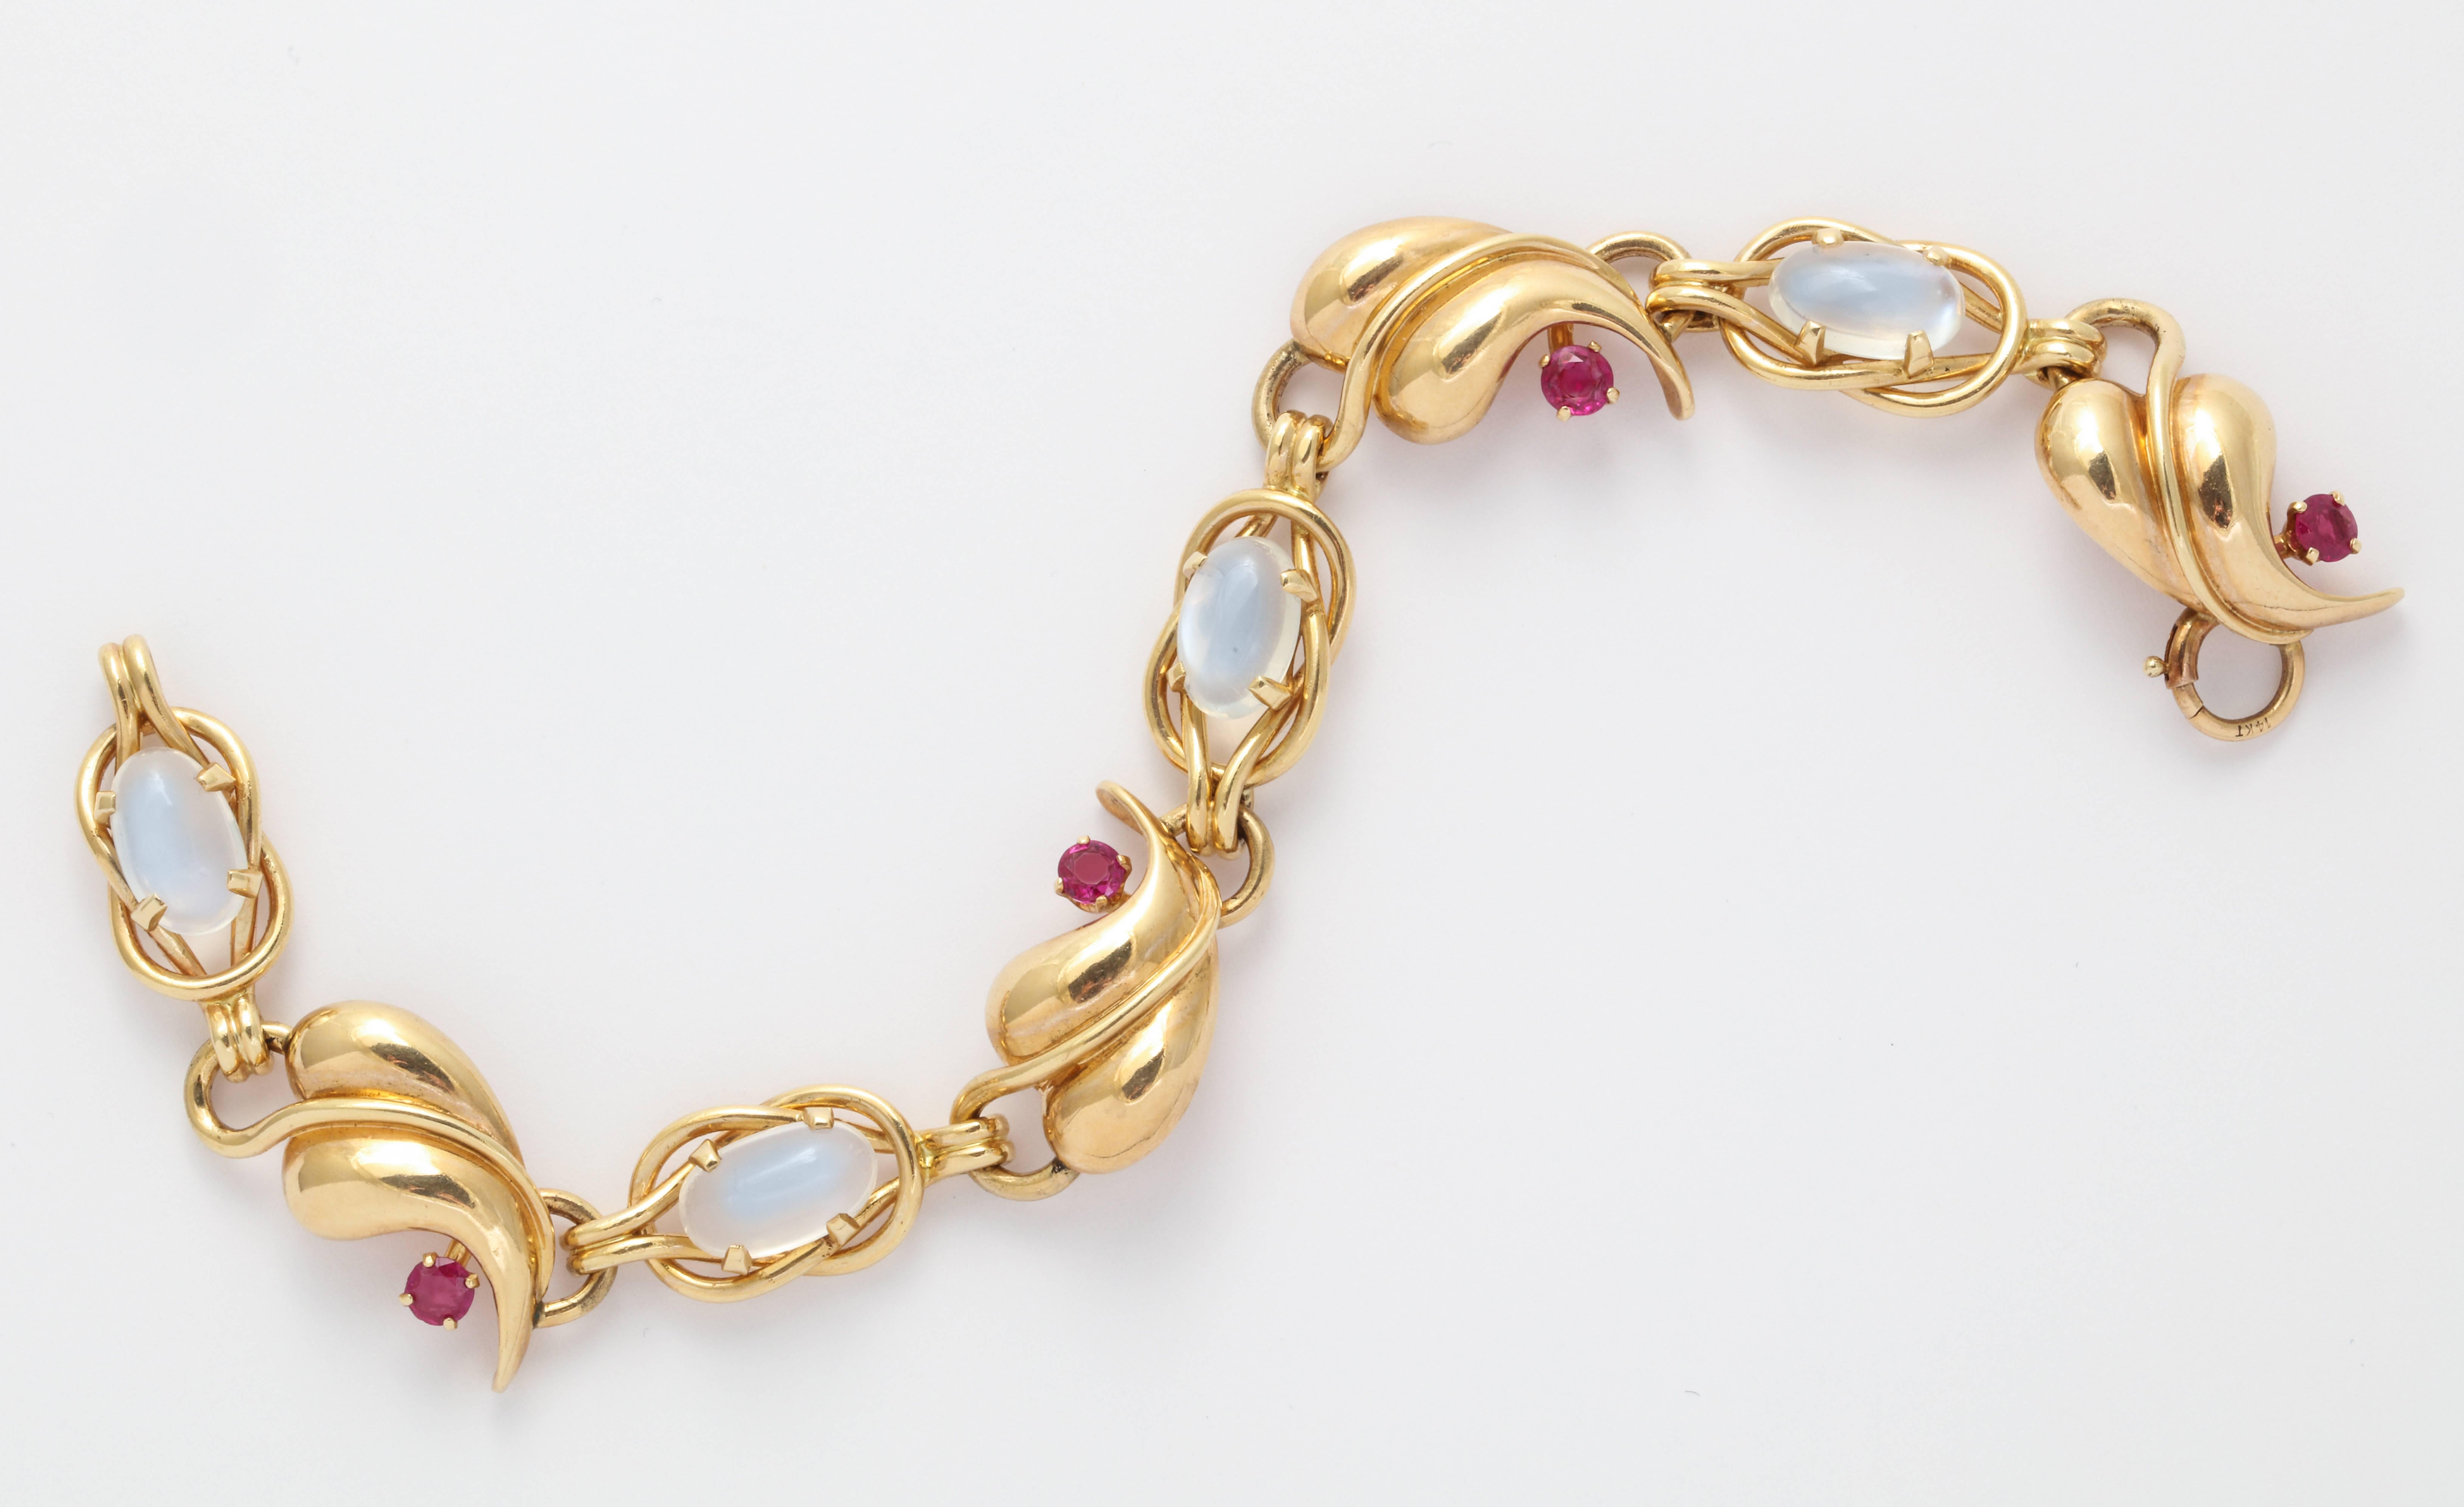 We offer a very pretty and wearable 1940s 14K gold link Retro bracelet set with glowing cabochon moonstones and natural rubies. Weighing 17.4 grams. Measuring 1/2 inch wide x 7 1/4 inches long.